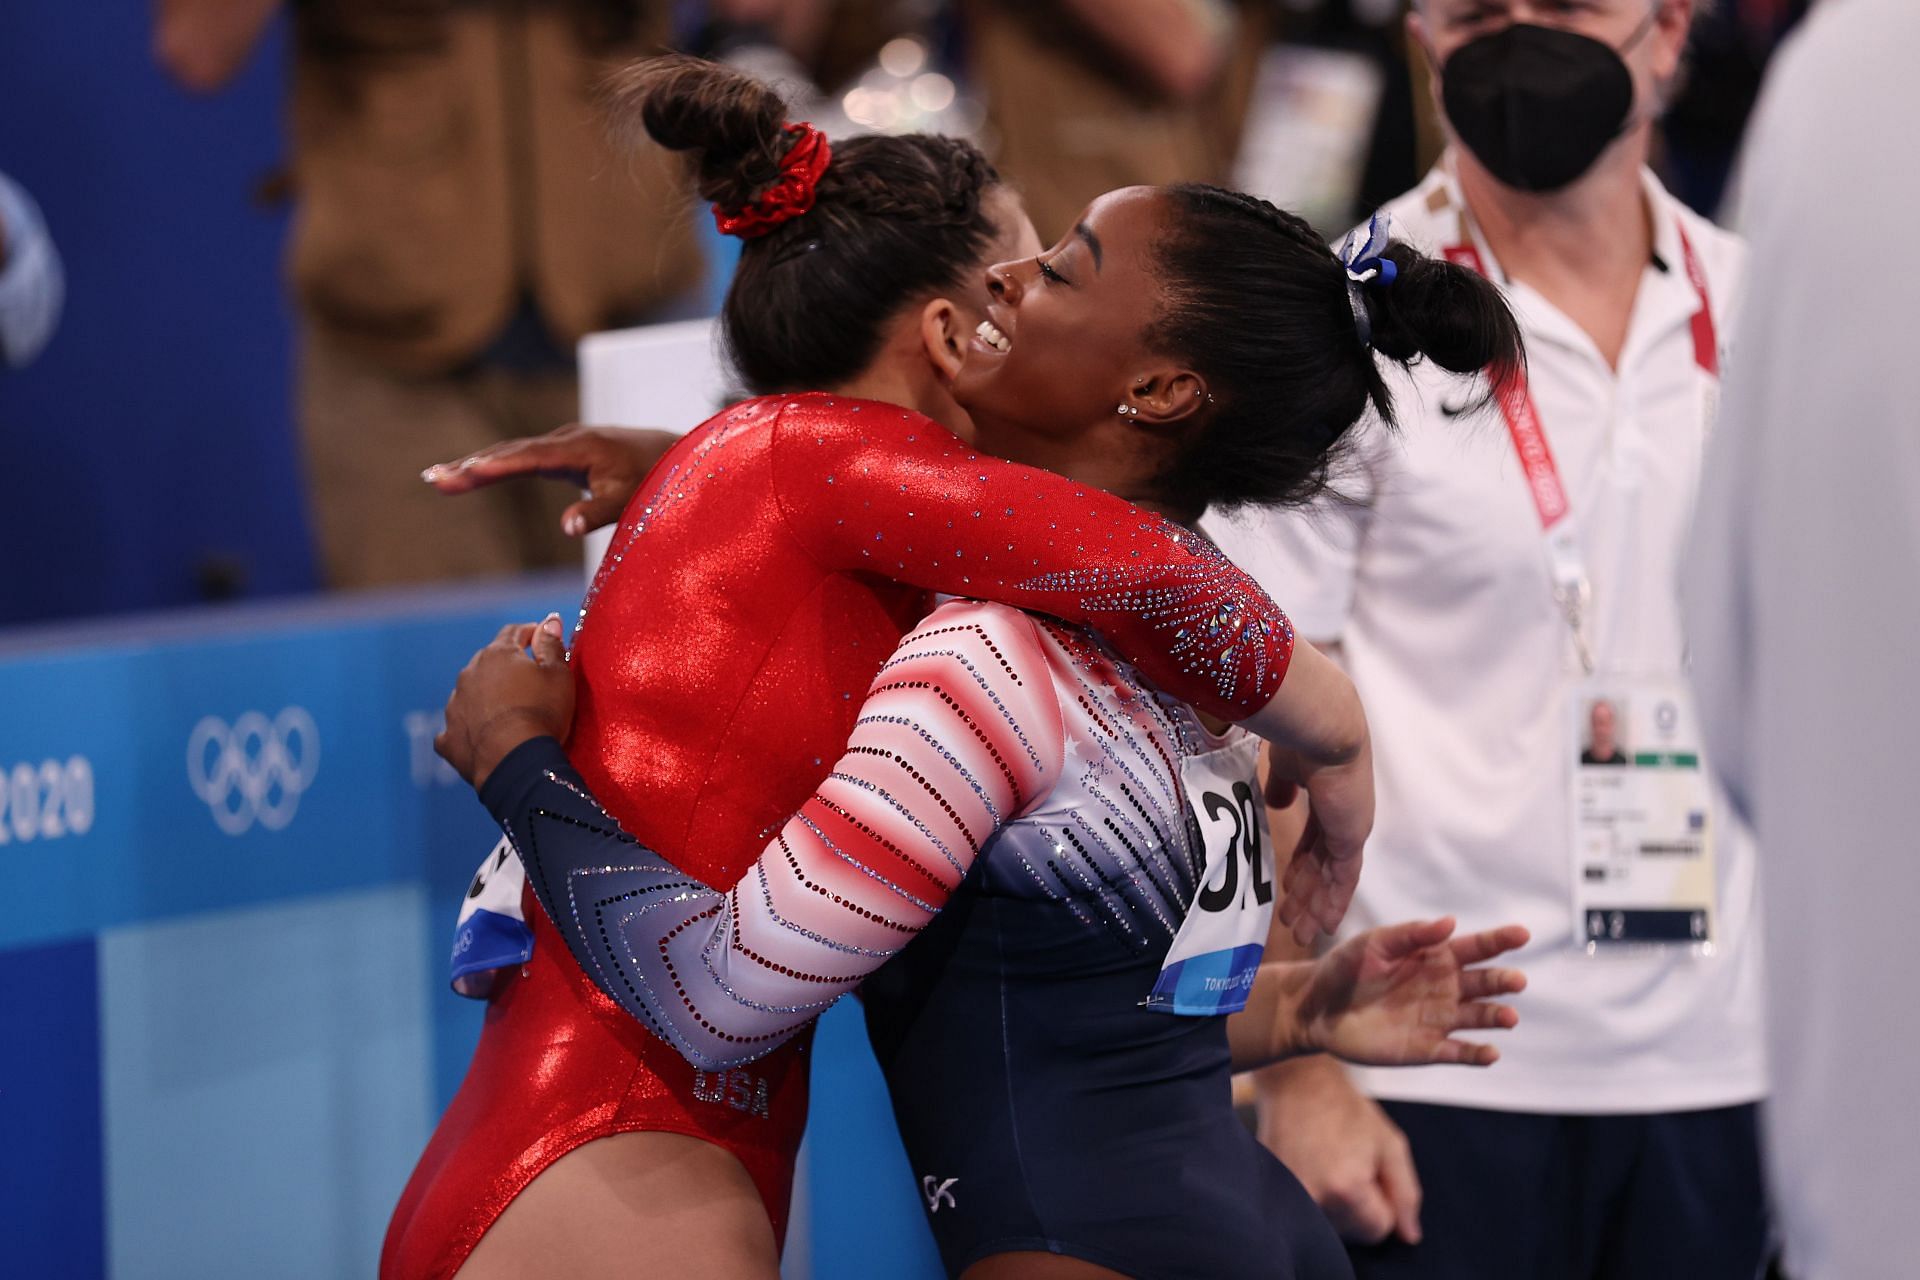 Gymnastics - Artistic - Olympics: Lee (Red) and Biles